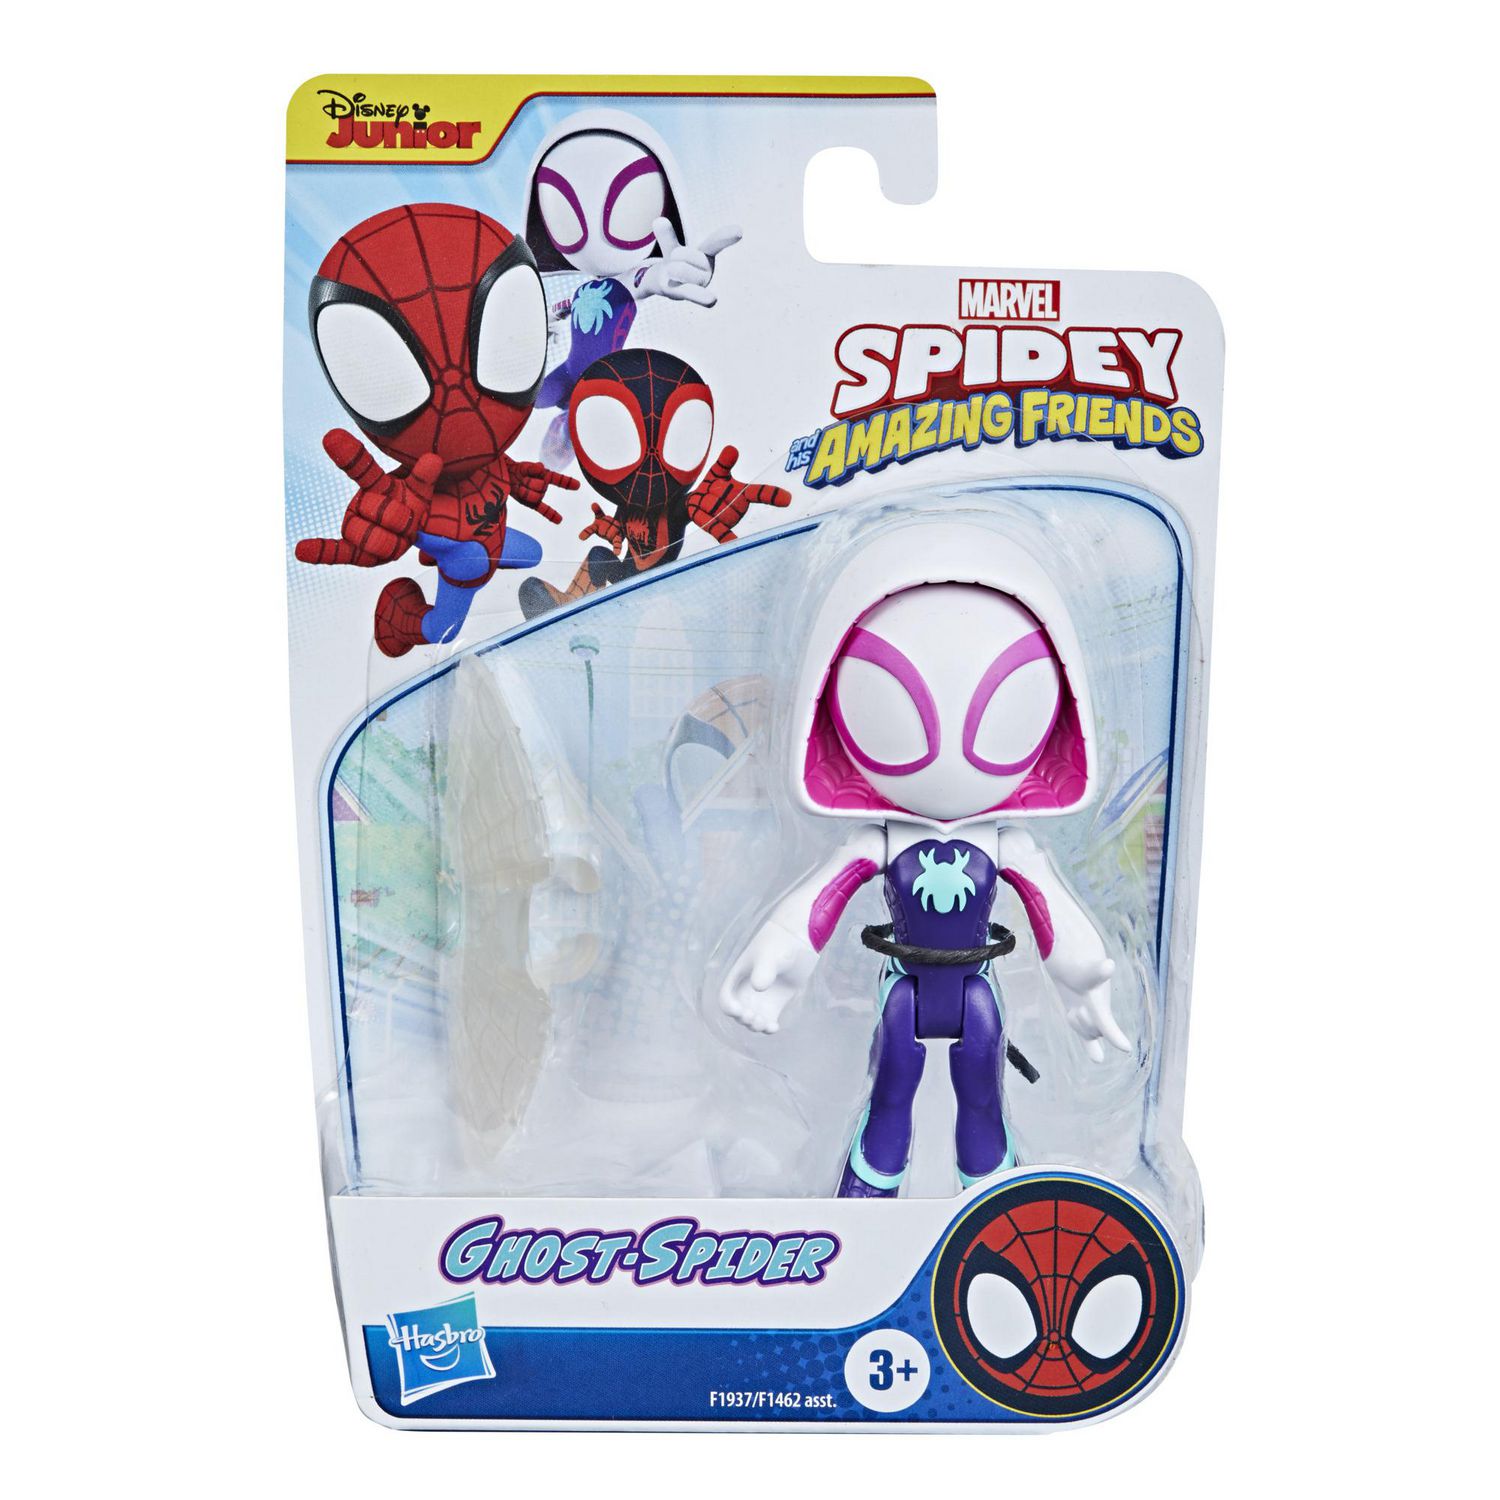 Marvel Spidey and His Amazing Friends Ghost-Spider Hero Figure